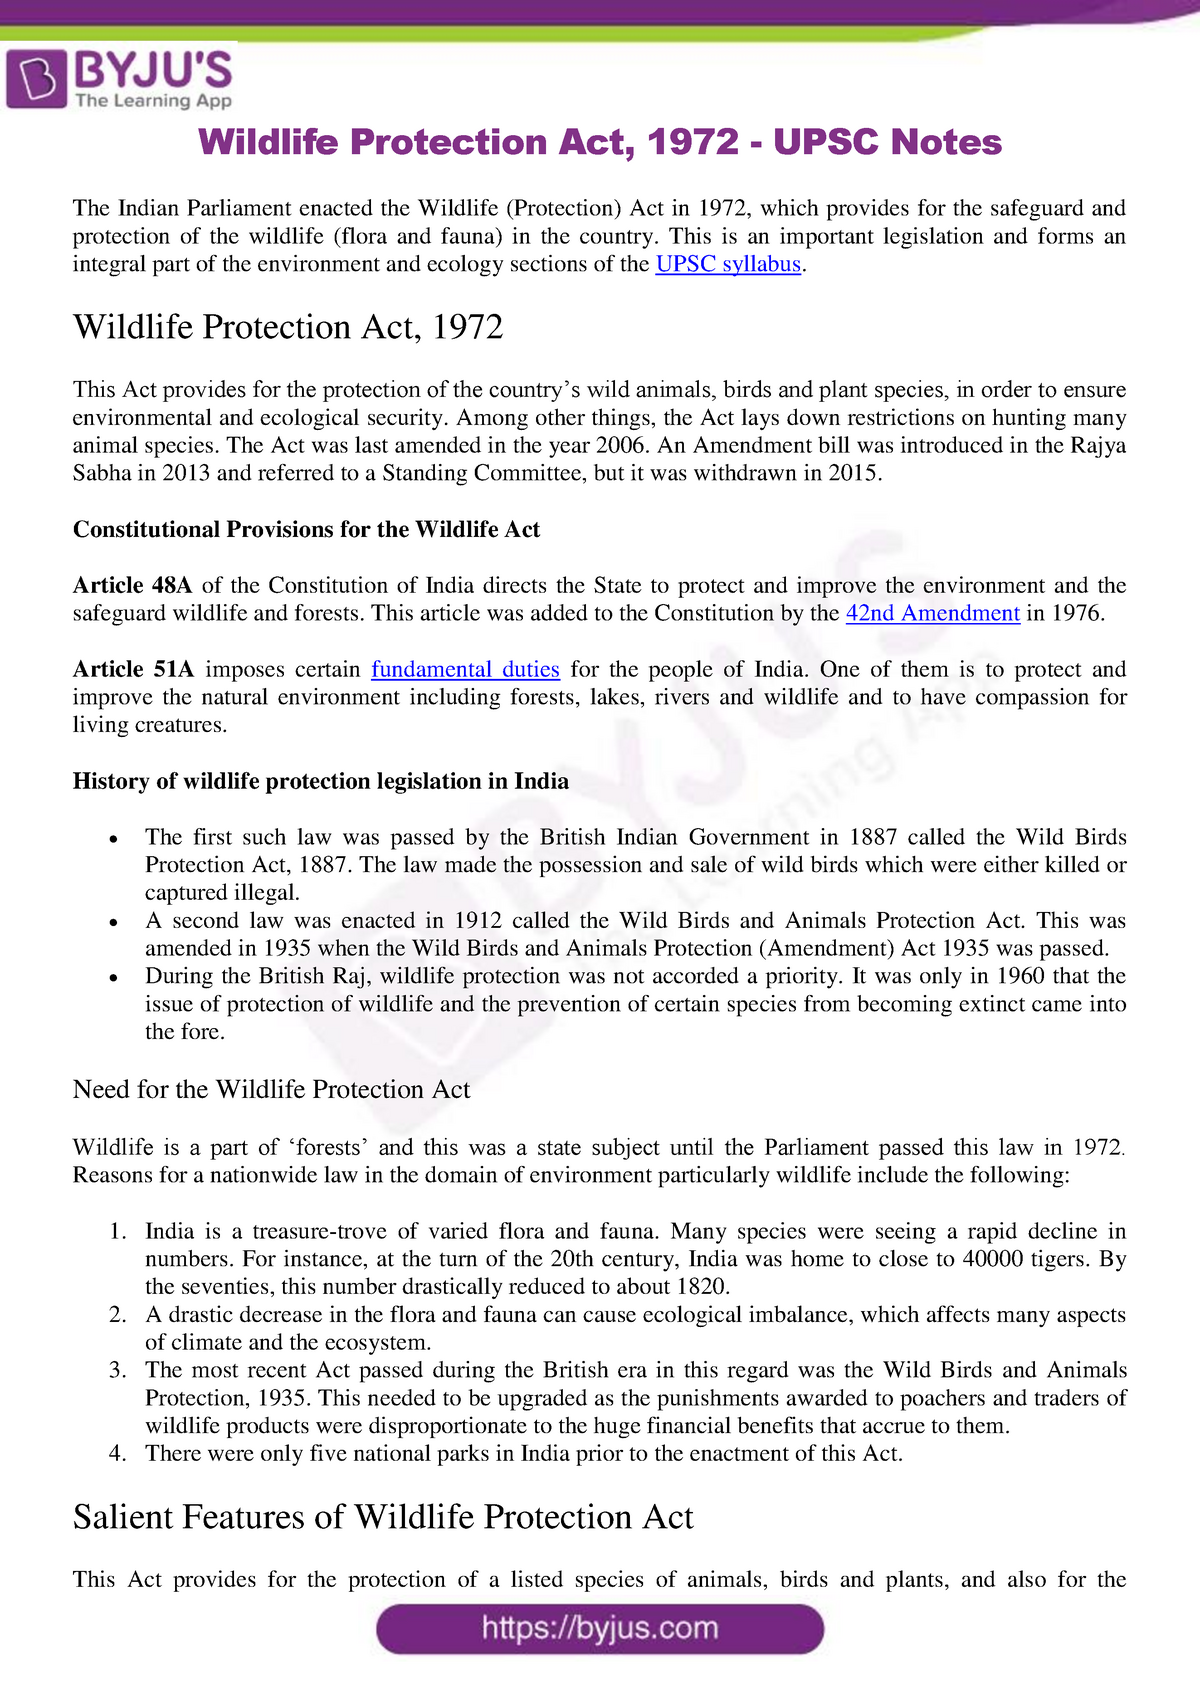 Wildlife Protection Act 1972 UPSC - This is an important legislation and  forms an integral part of - Studocu